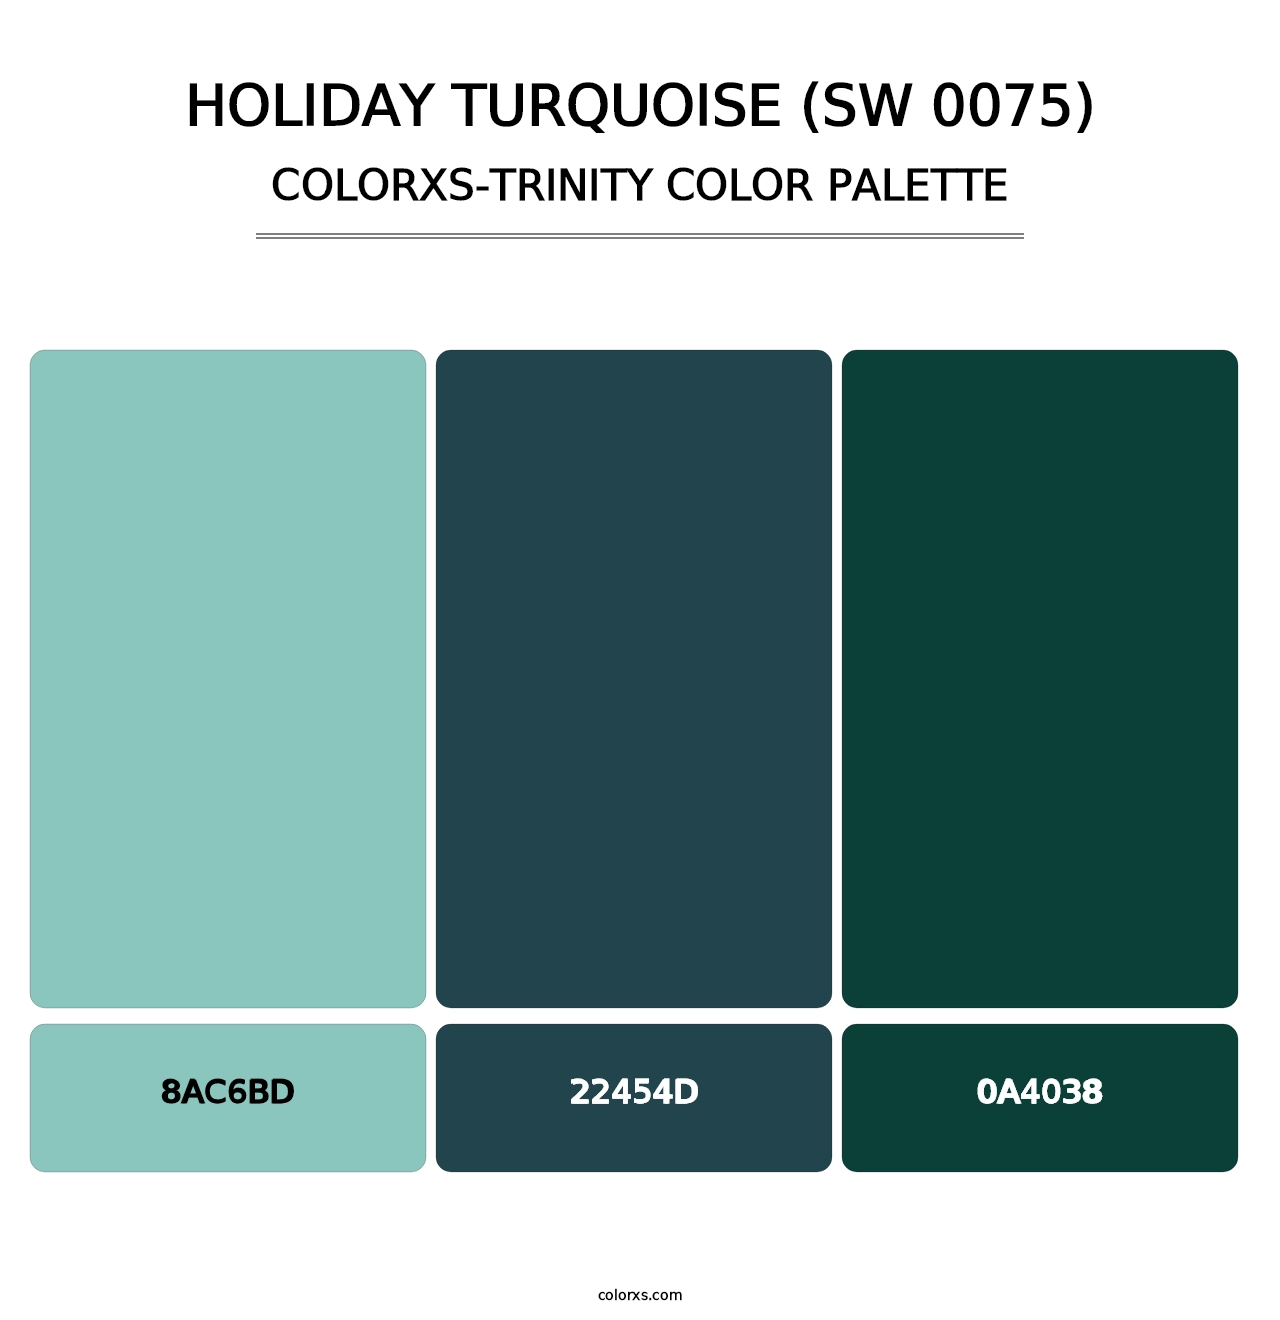 Holiday Turquoise (SW 0075) - Colorxs Trinity Palette